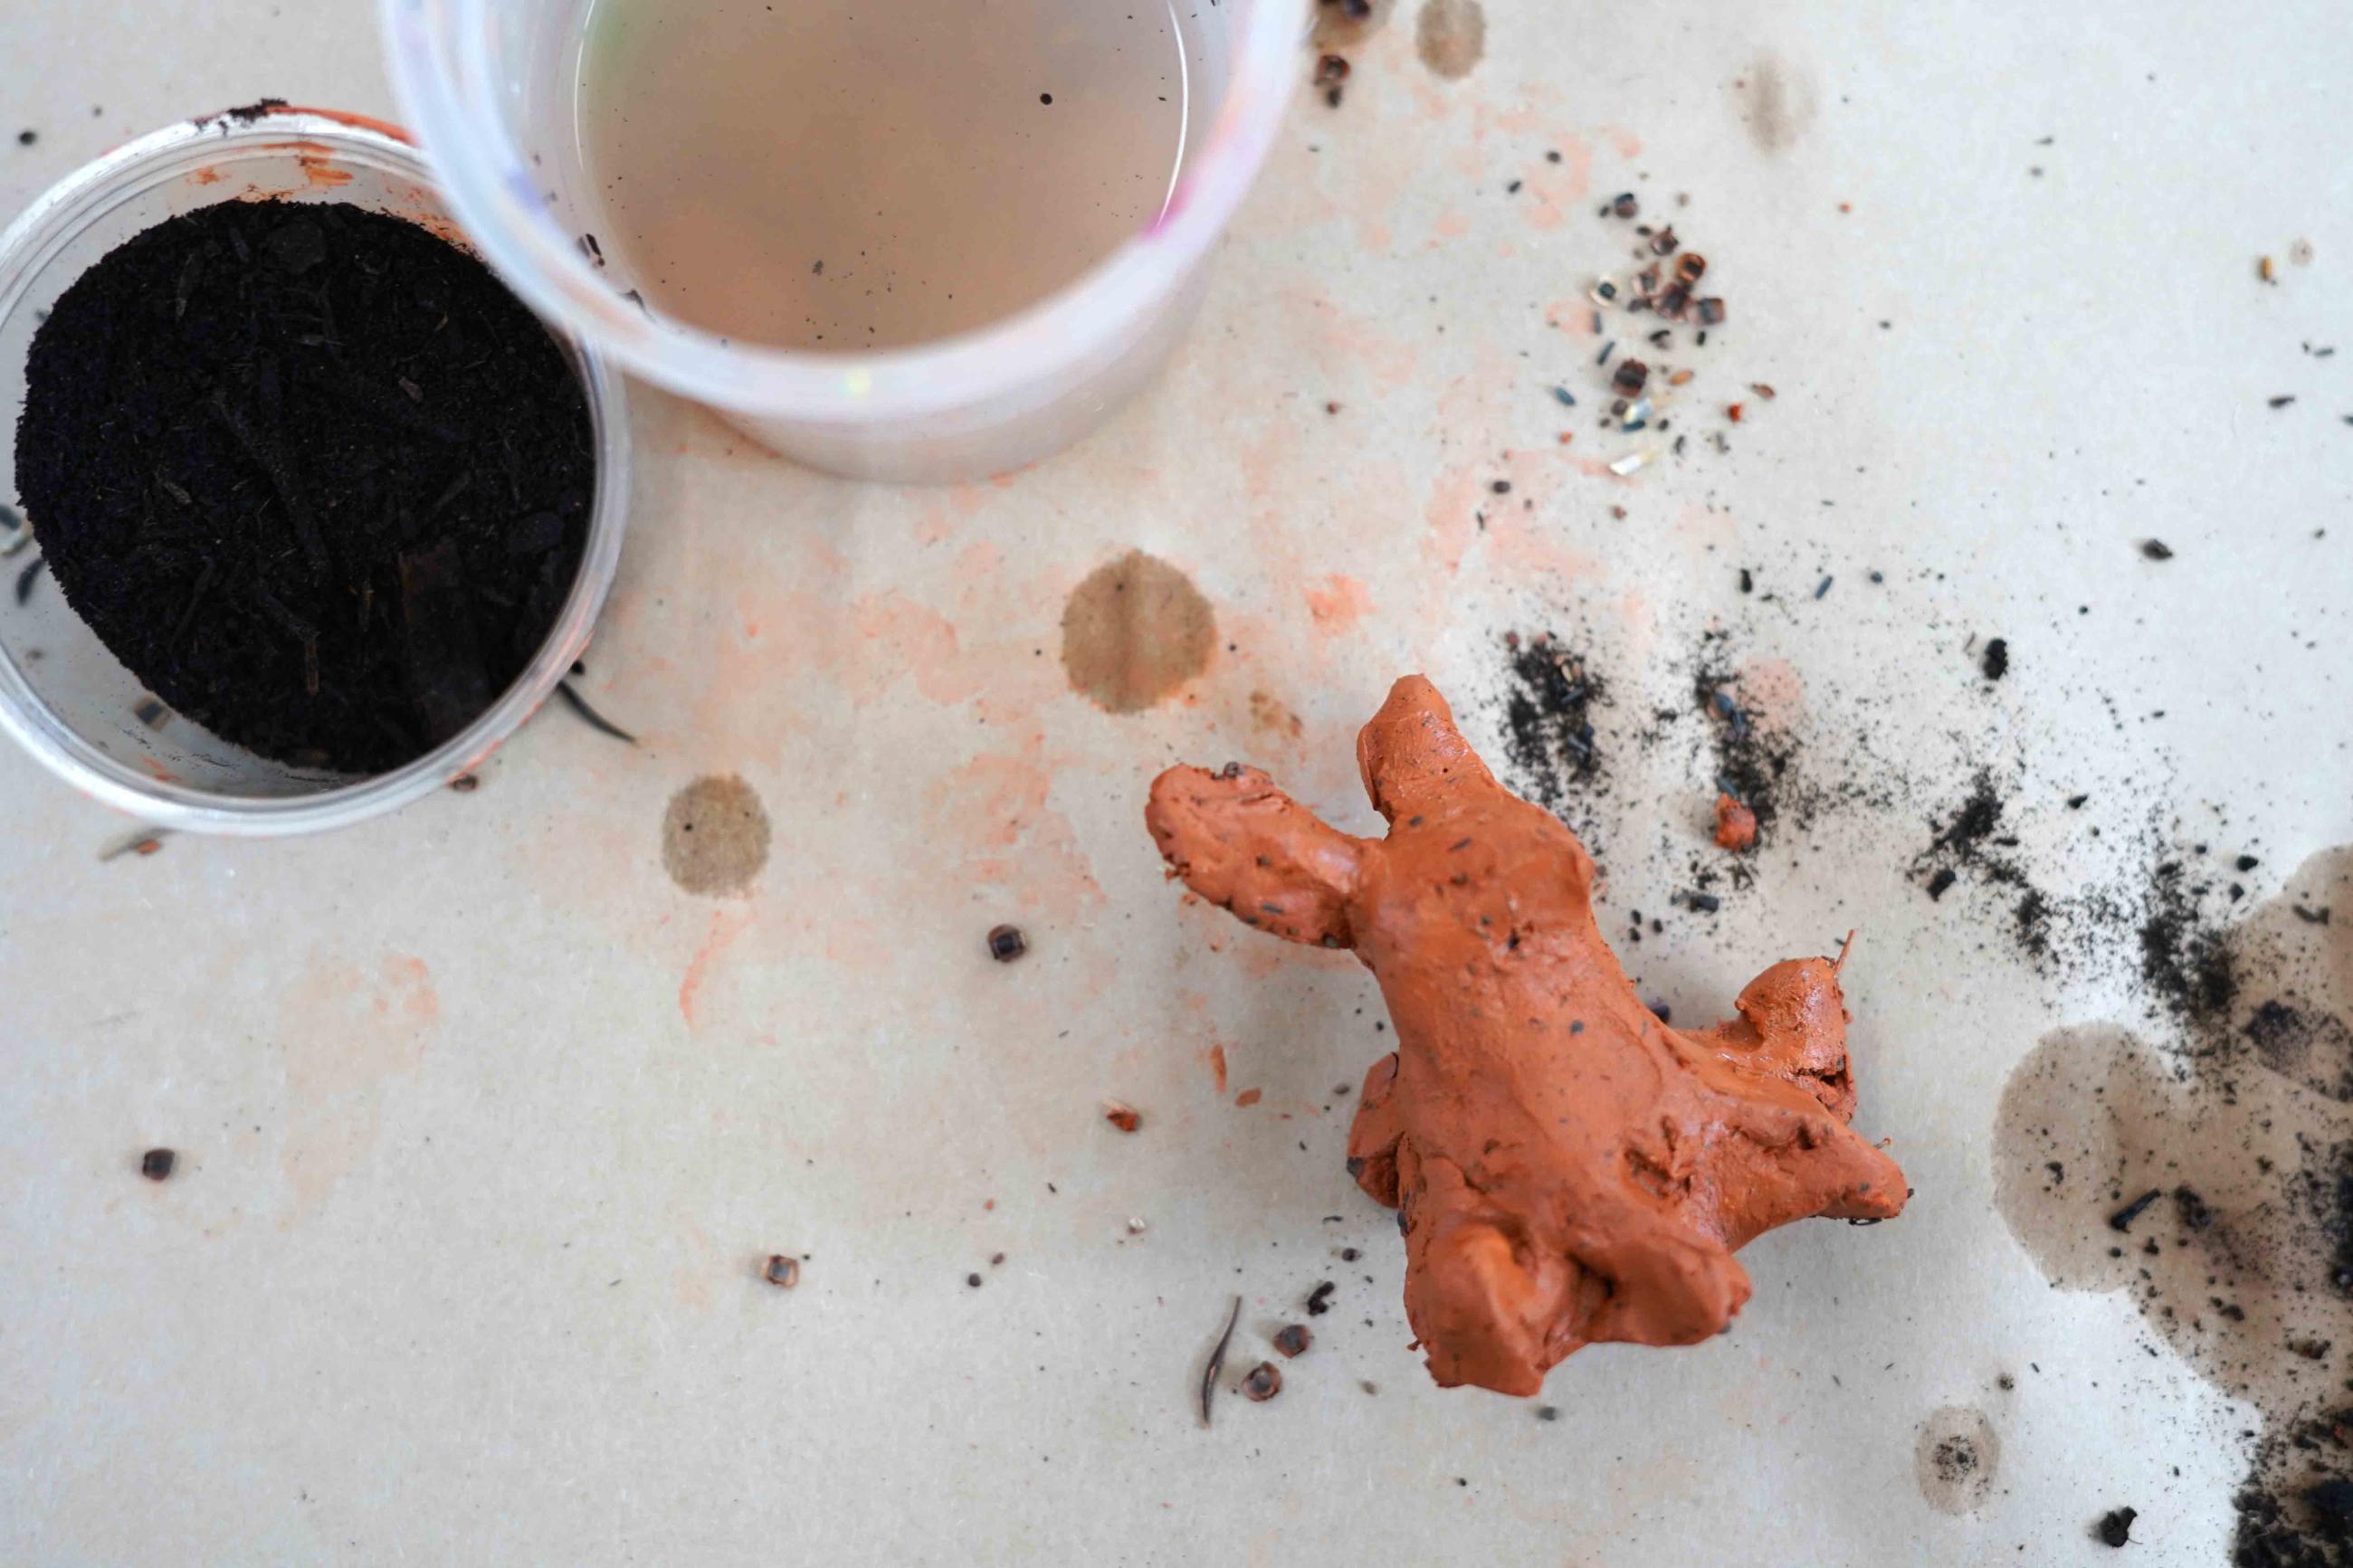 Photo of a cup with water, a cup with soil, and a small clay sculpture shaped like a bunny